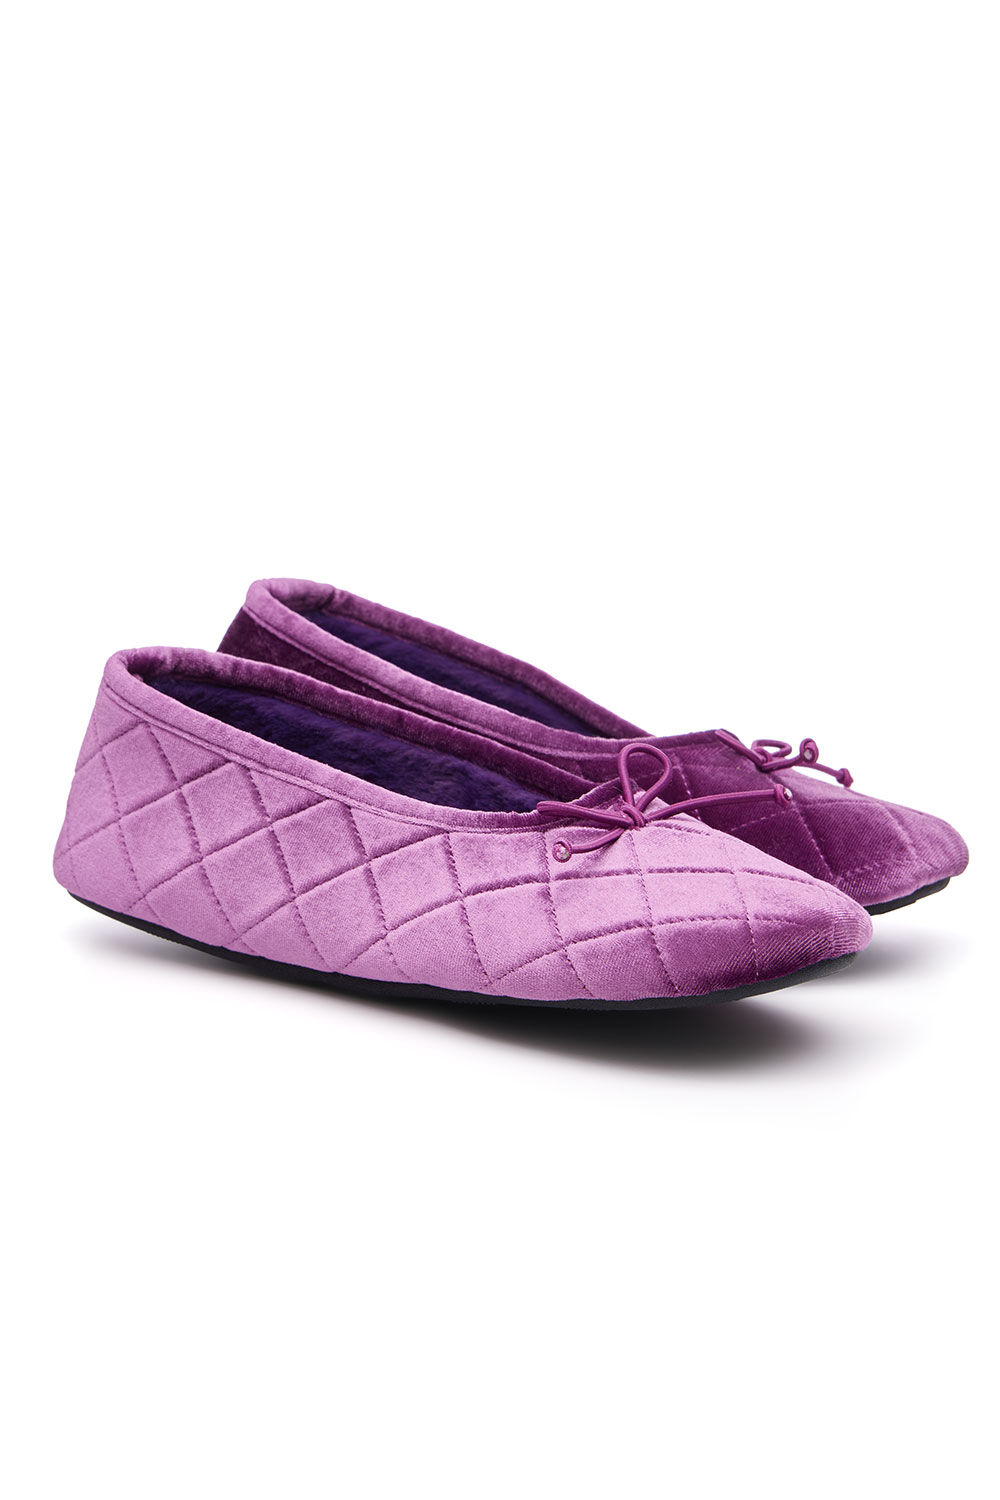 Bonmarche Magenta Velvet Faux Fur Lined Slippers With Bow Detail, Size: 4